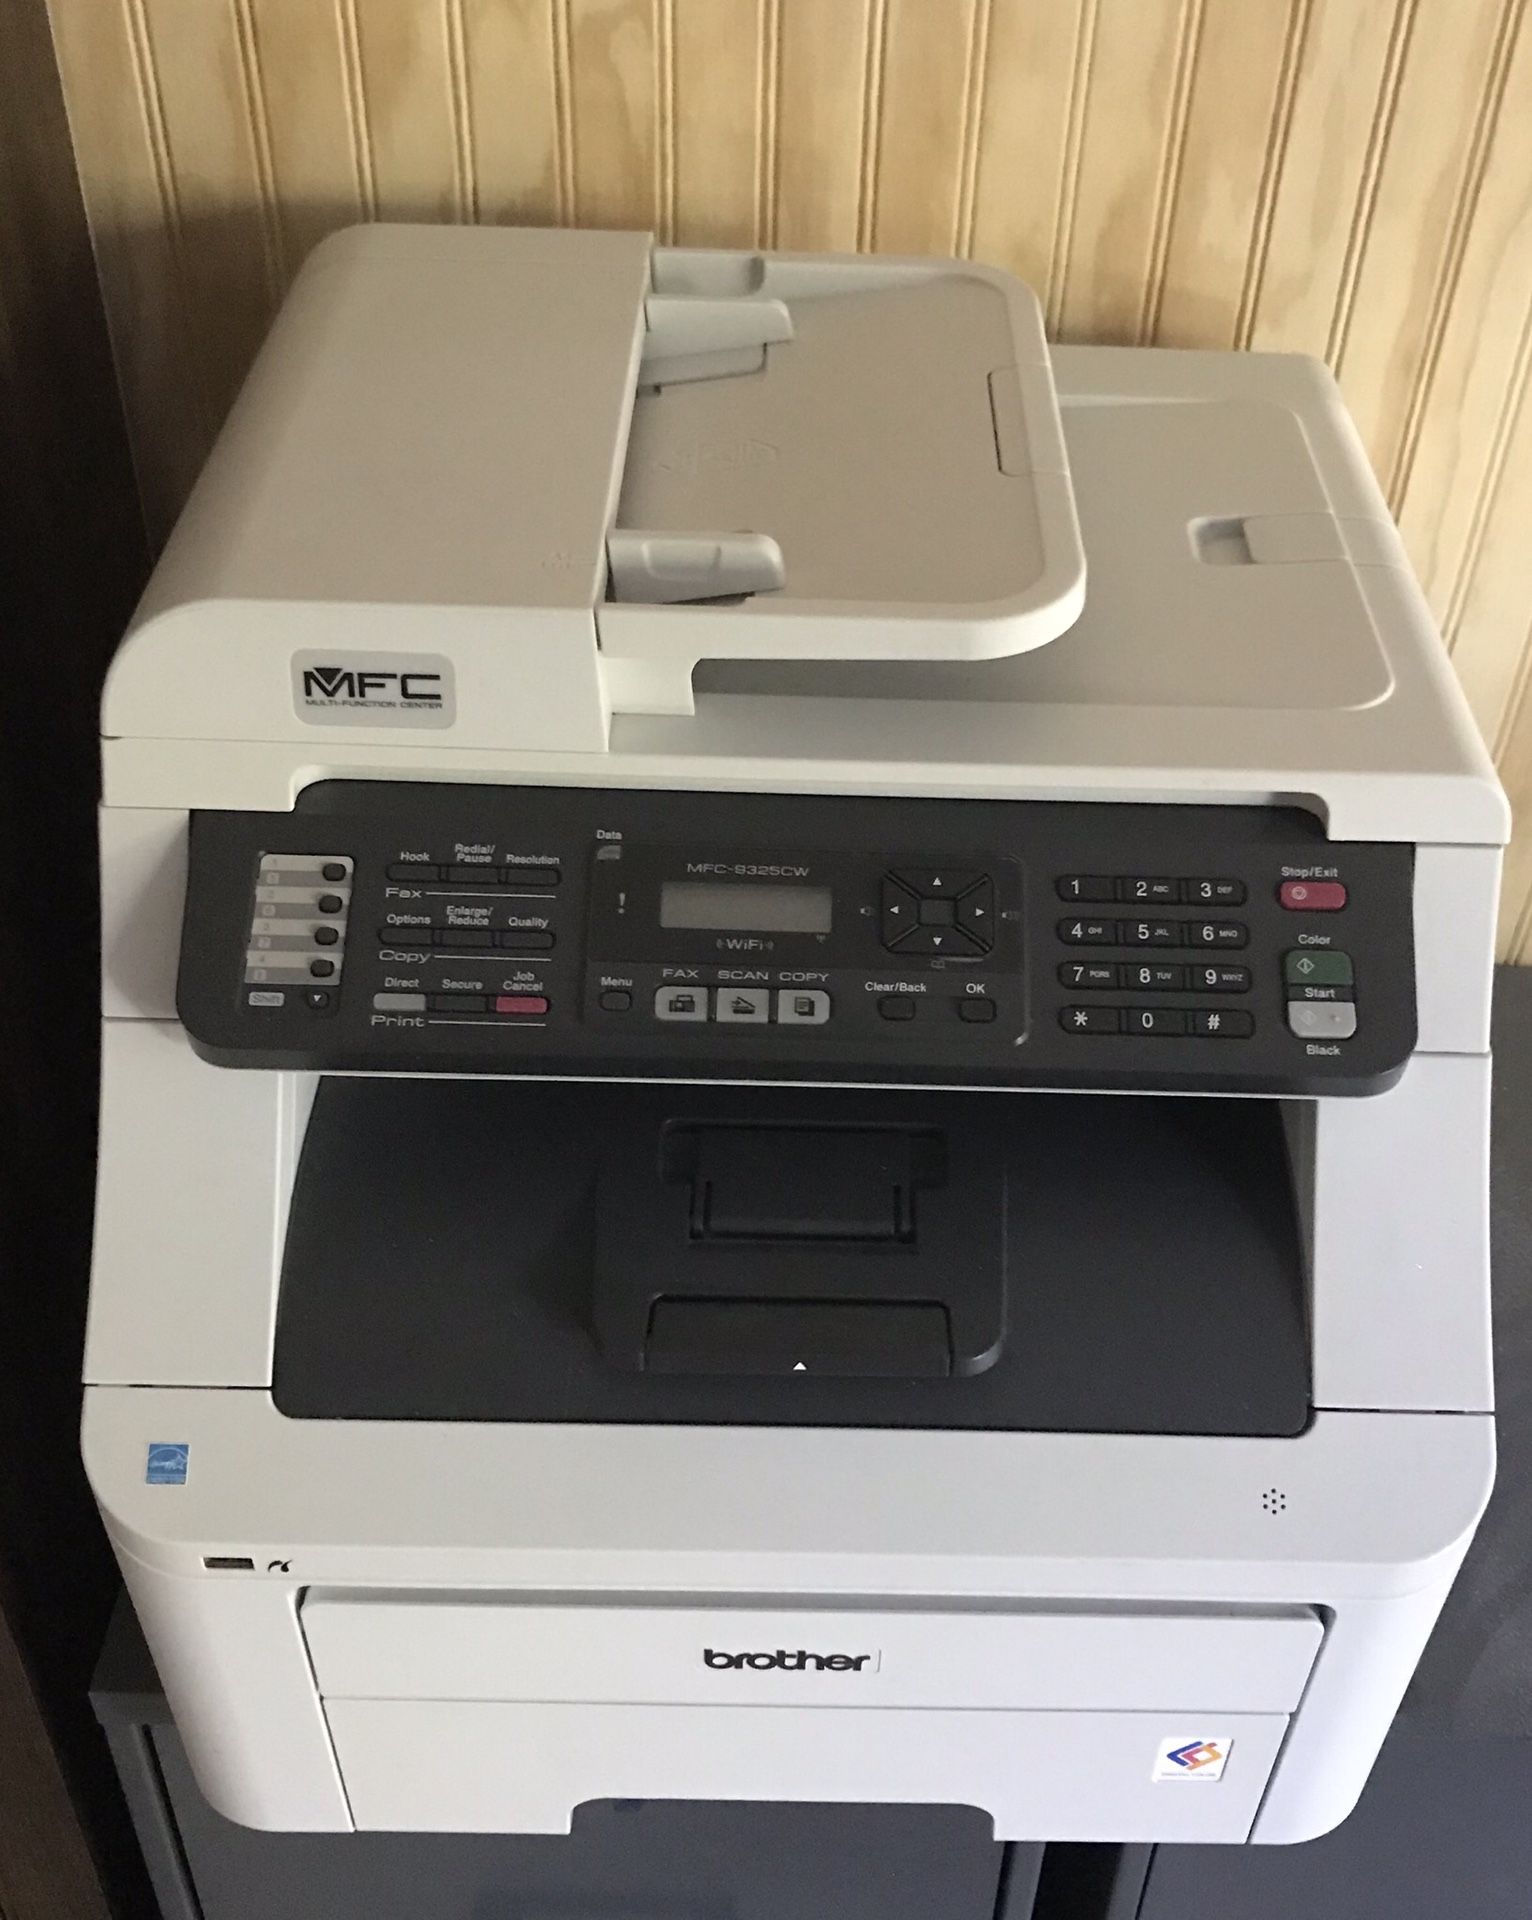 Wireless Brother Color Printer /Scanner/Fax